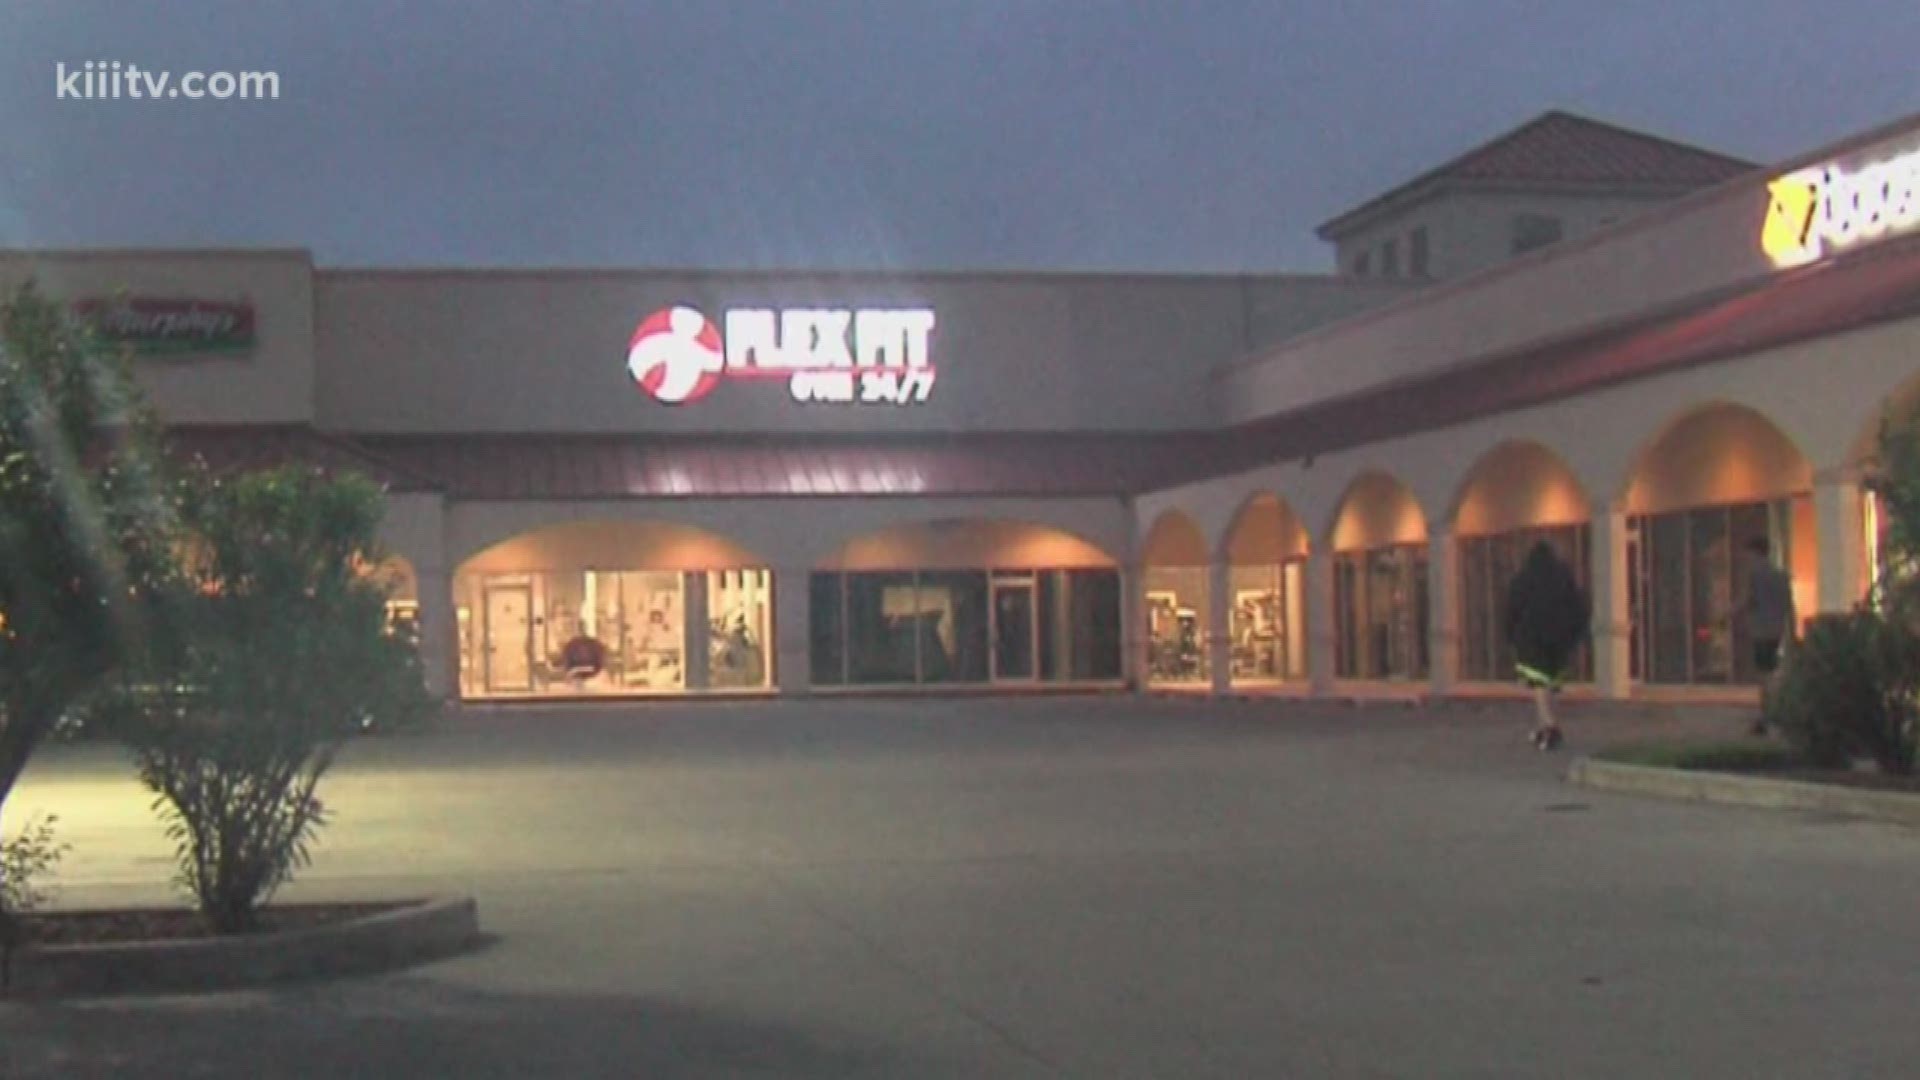 Members of a favorite 24-hour gym are speaking out Tuesday night after learning that two locations in Corpus Christi had shut their doors for good.